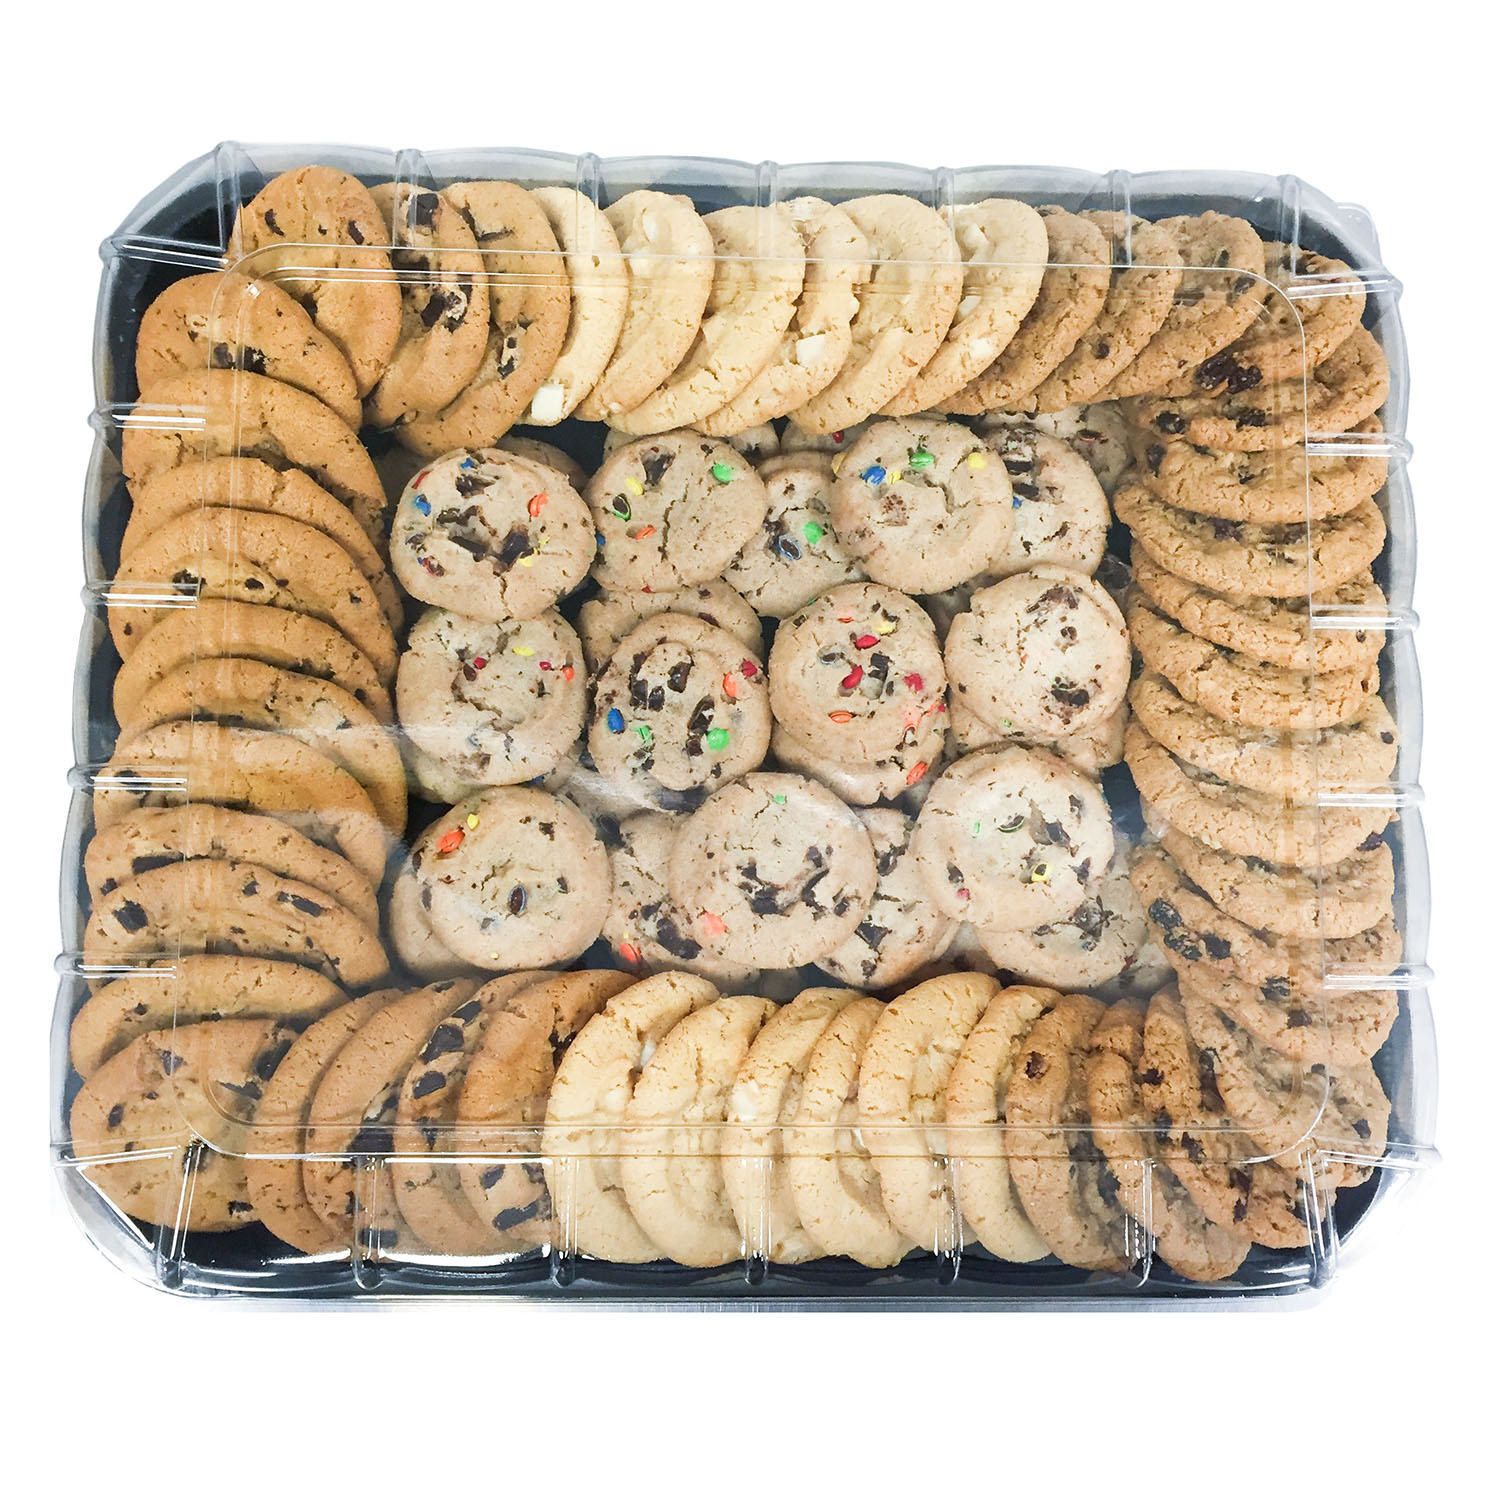 A tray of cookies